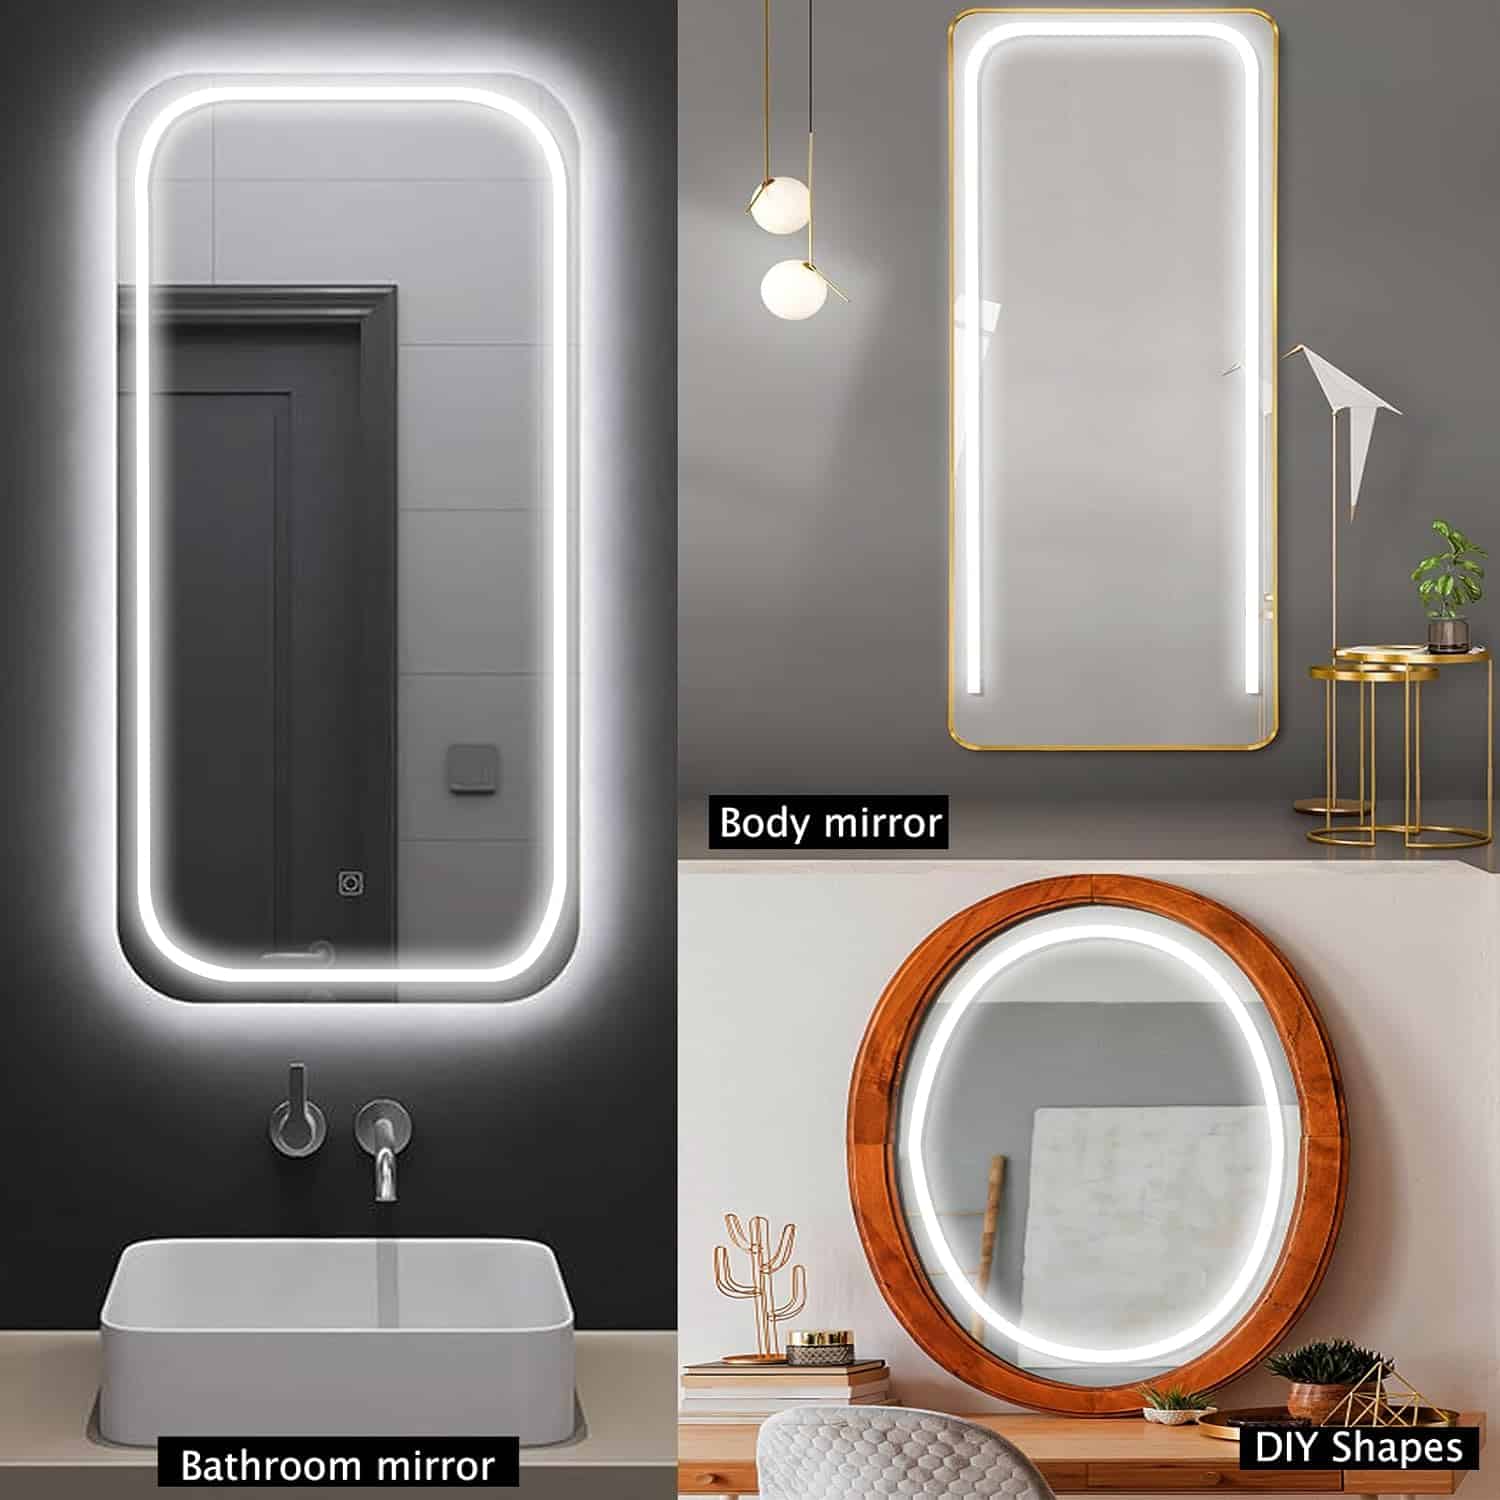 LED Vanity Mirror Lights Review